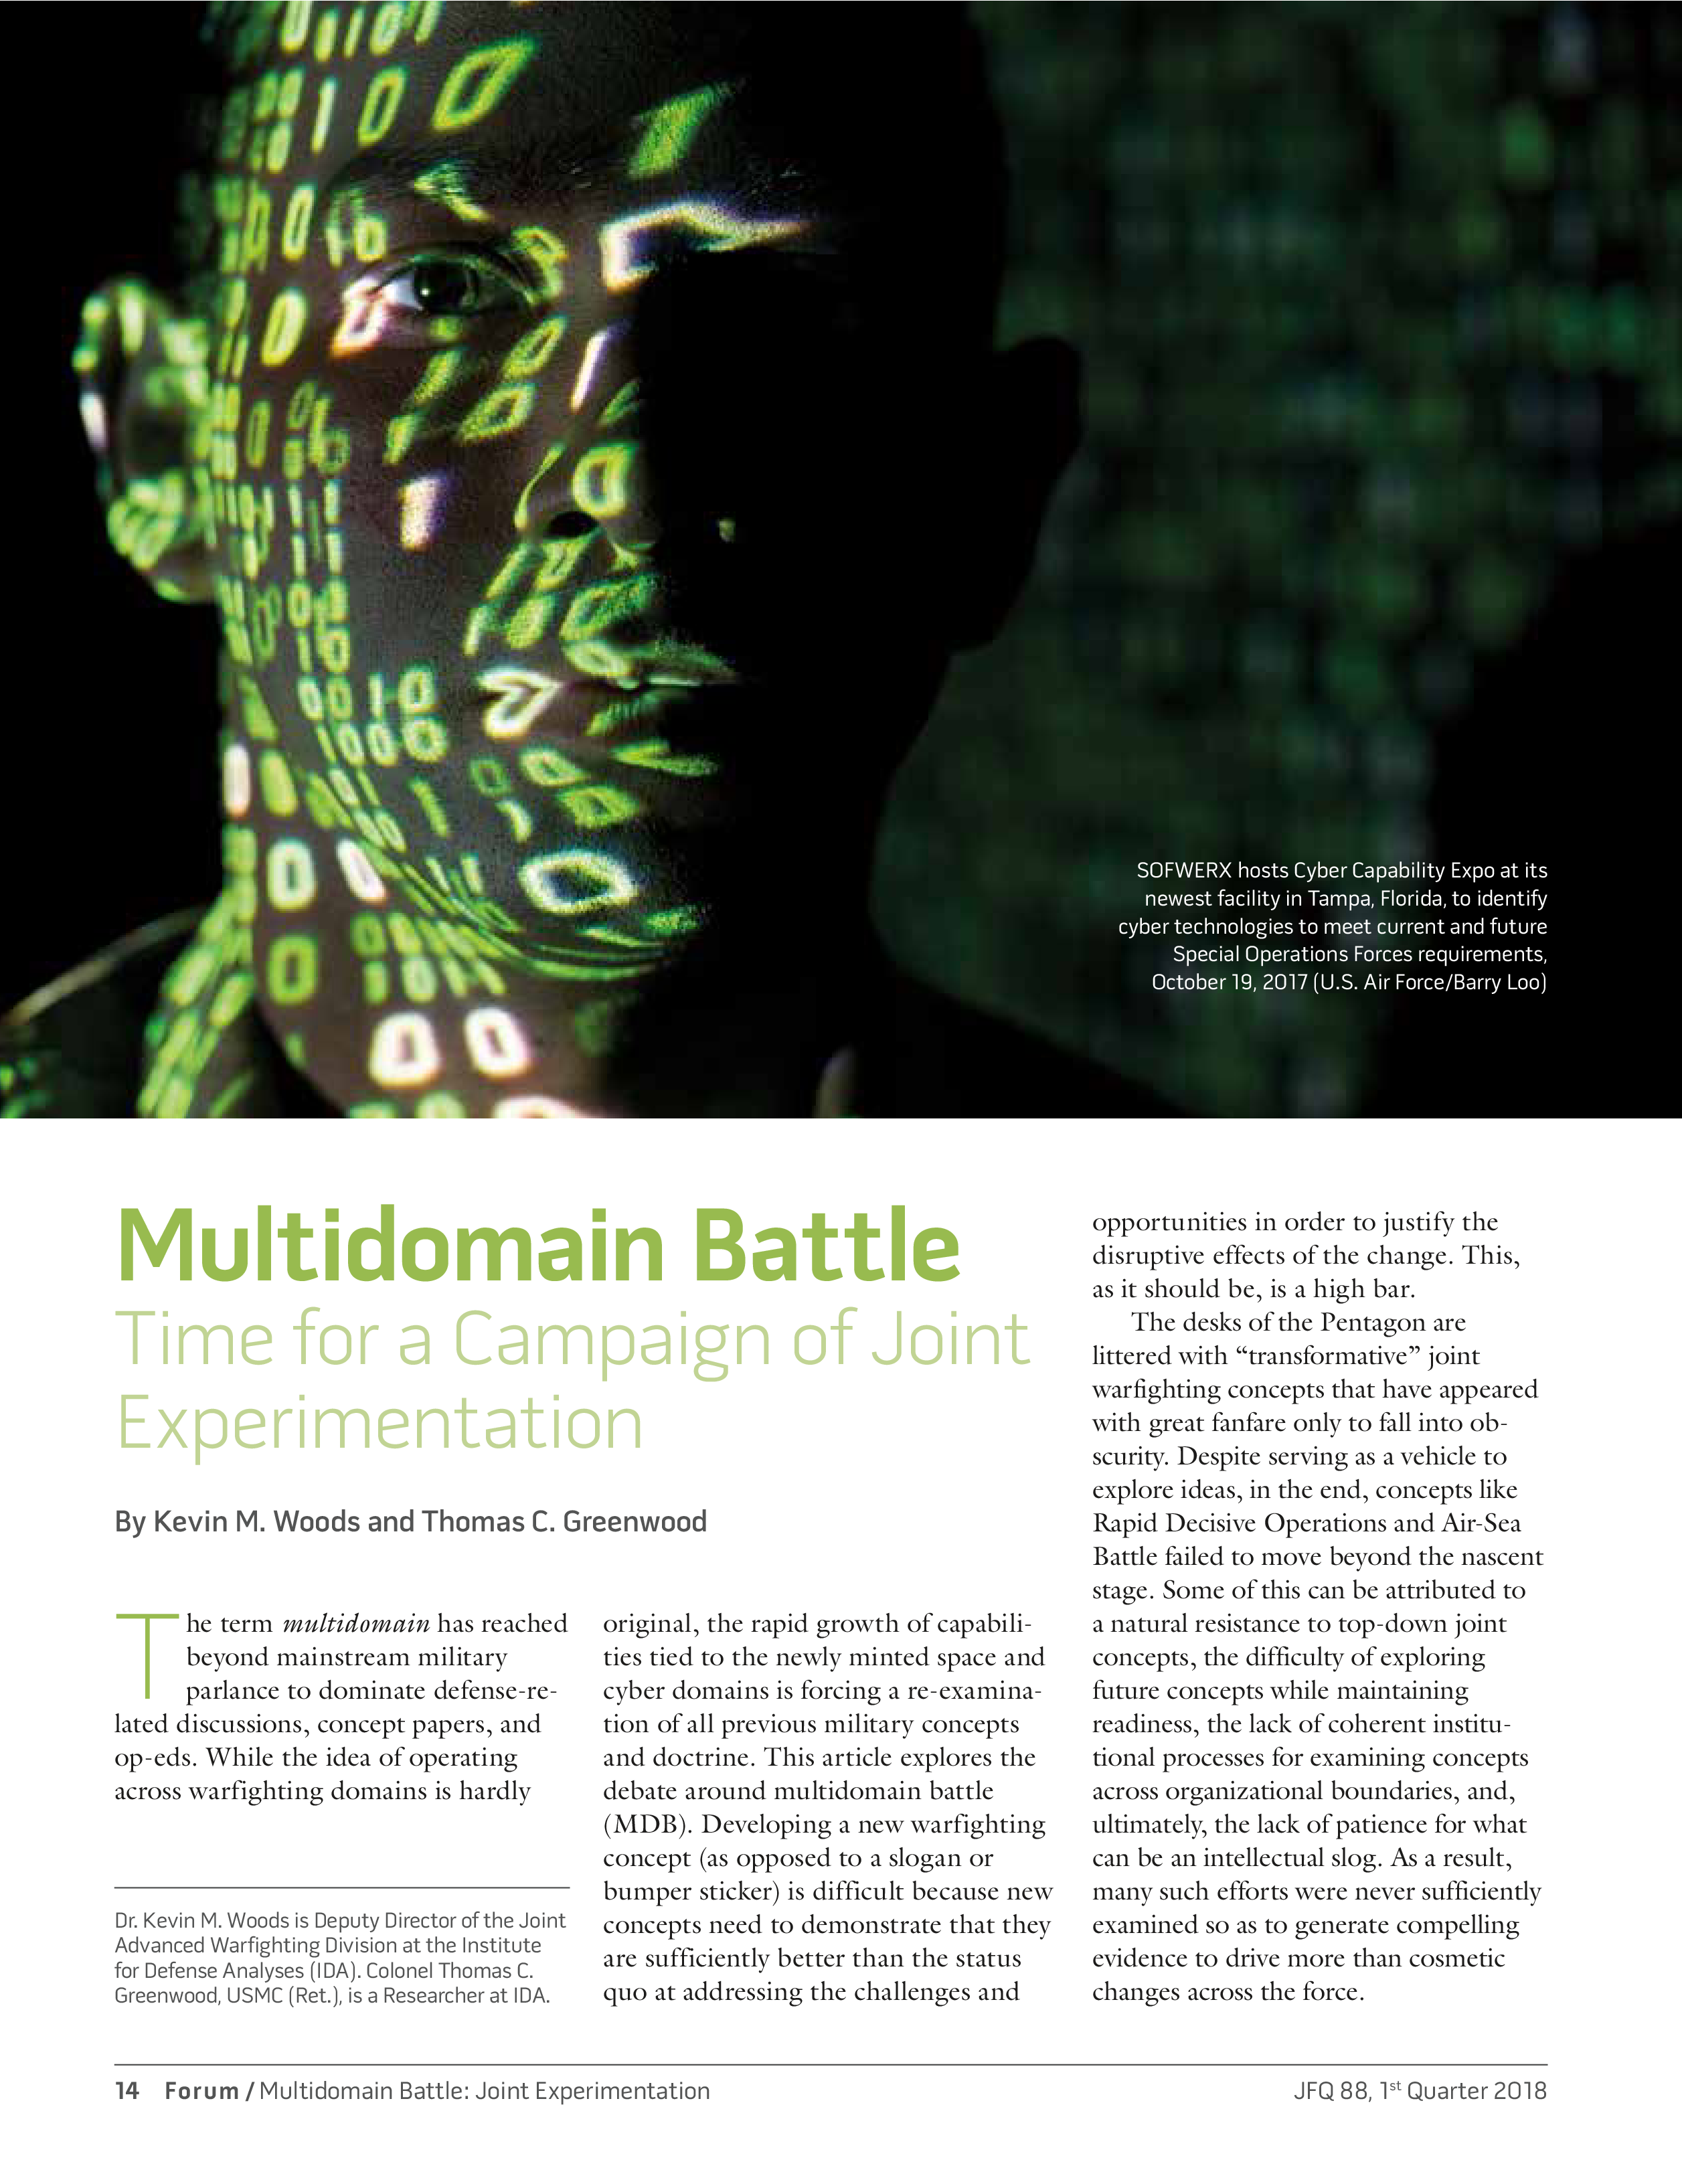 Multi-Domain Battle: Time for a Campaign of Joint Experimentation